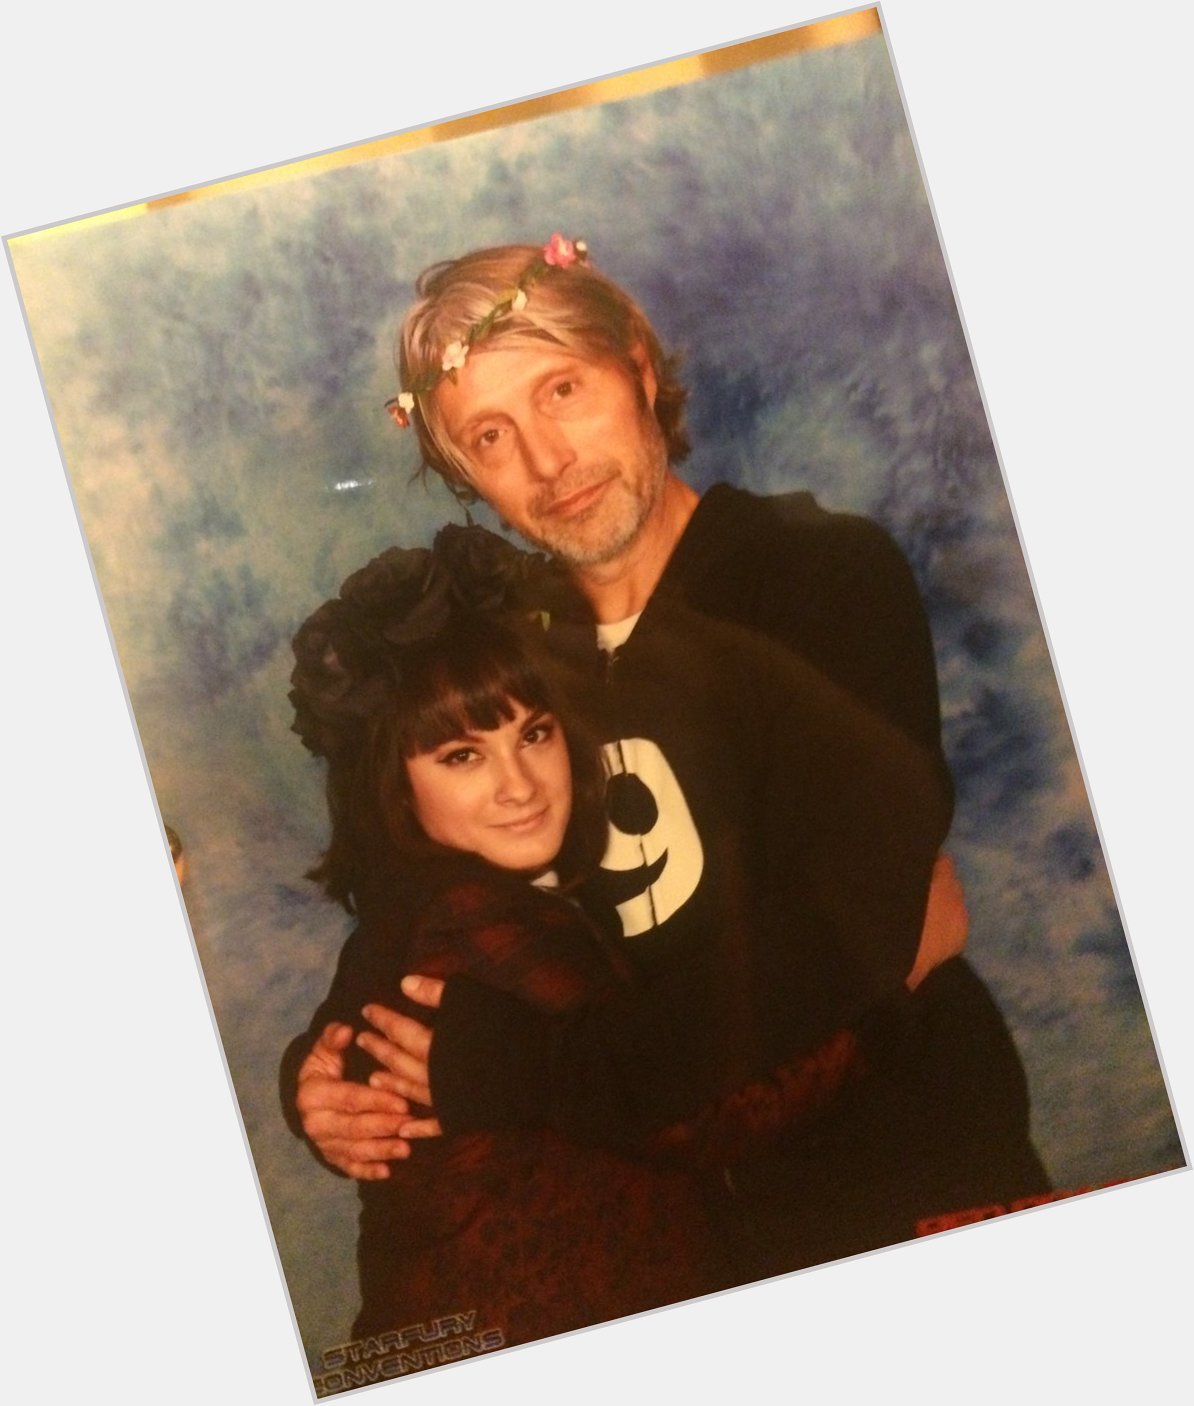 Happy Birthday to my favourite Bond villain and baby cannibal. Mads Mikkelsen! 